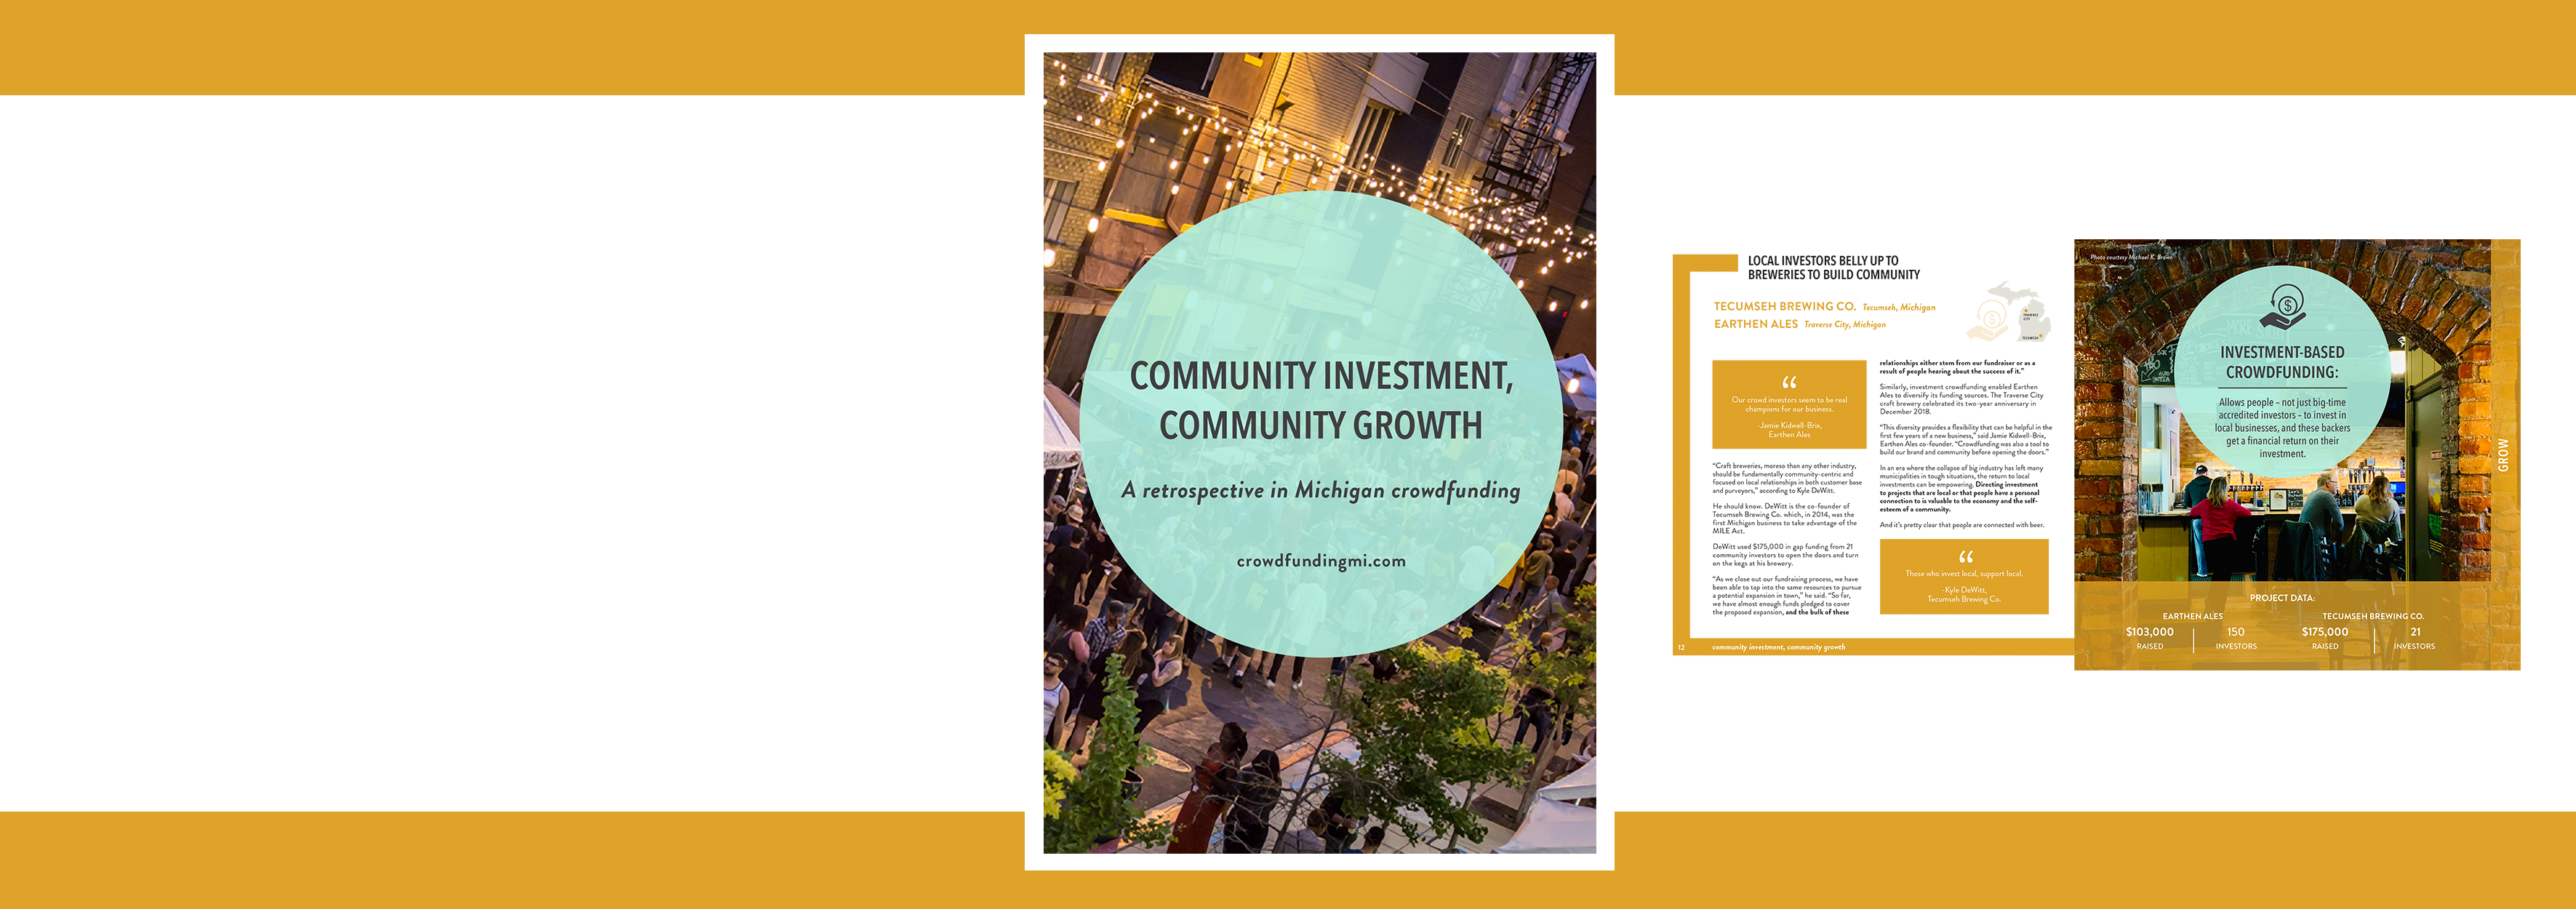 Community Investment, Community Growth 